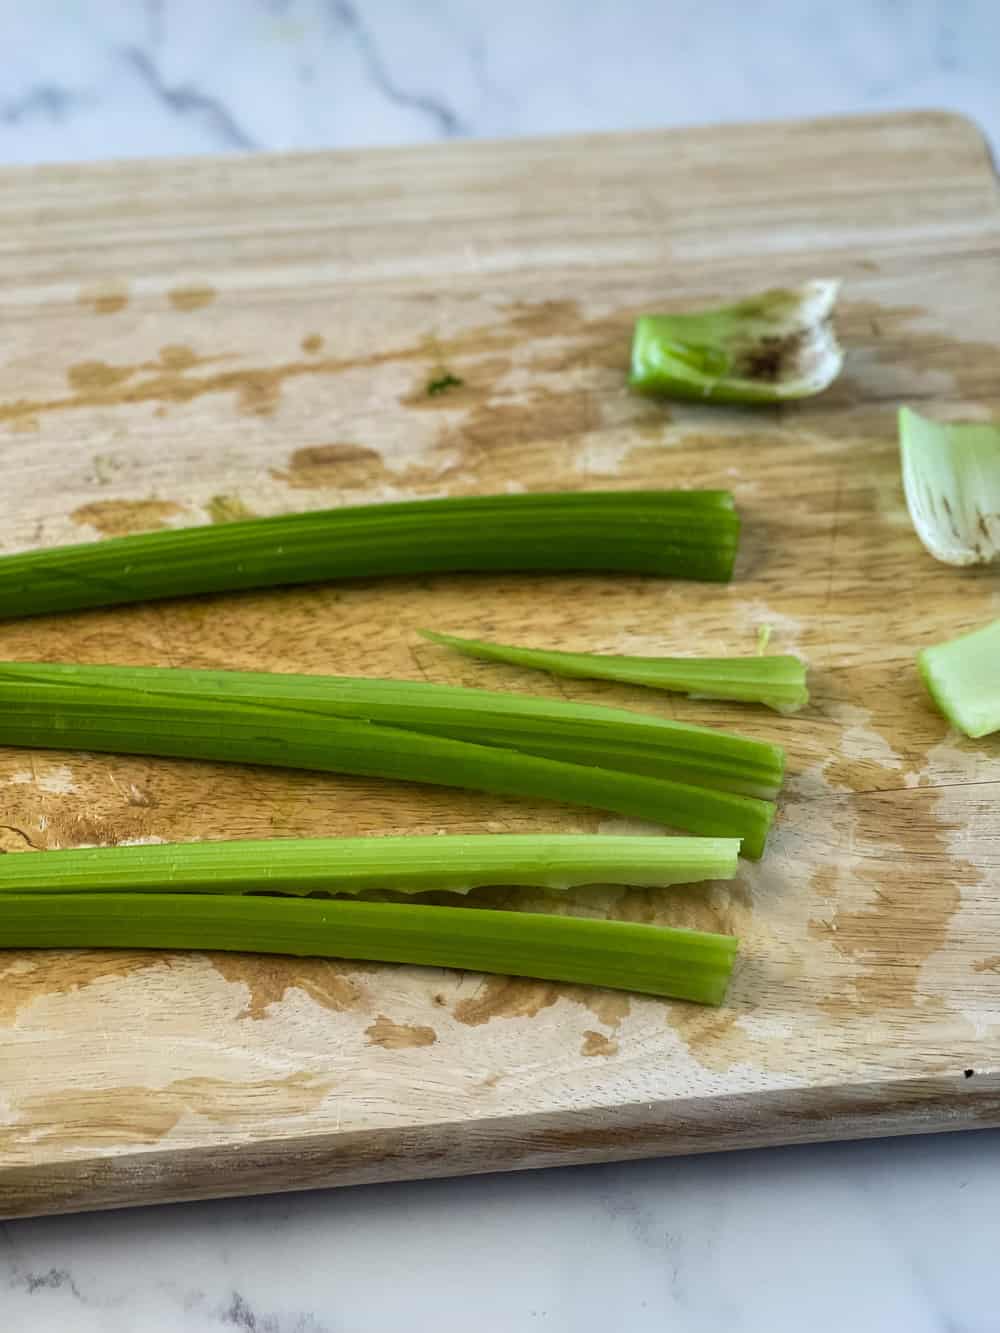 cutting the celery sticks and showing how to slice long ways into each stalk before cutting